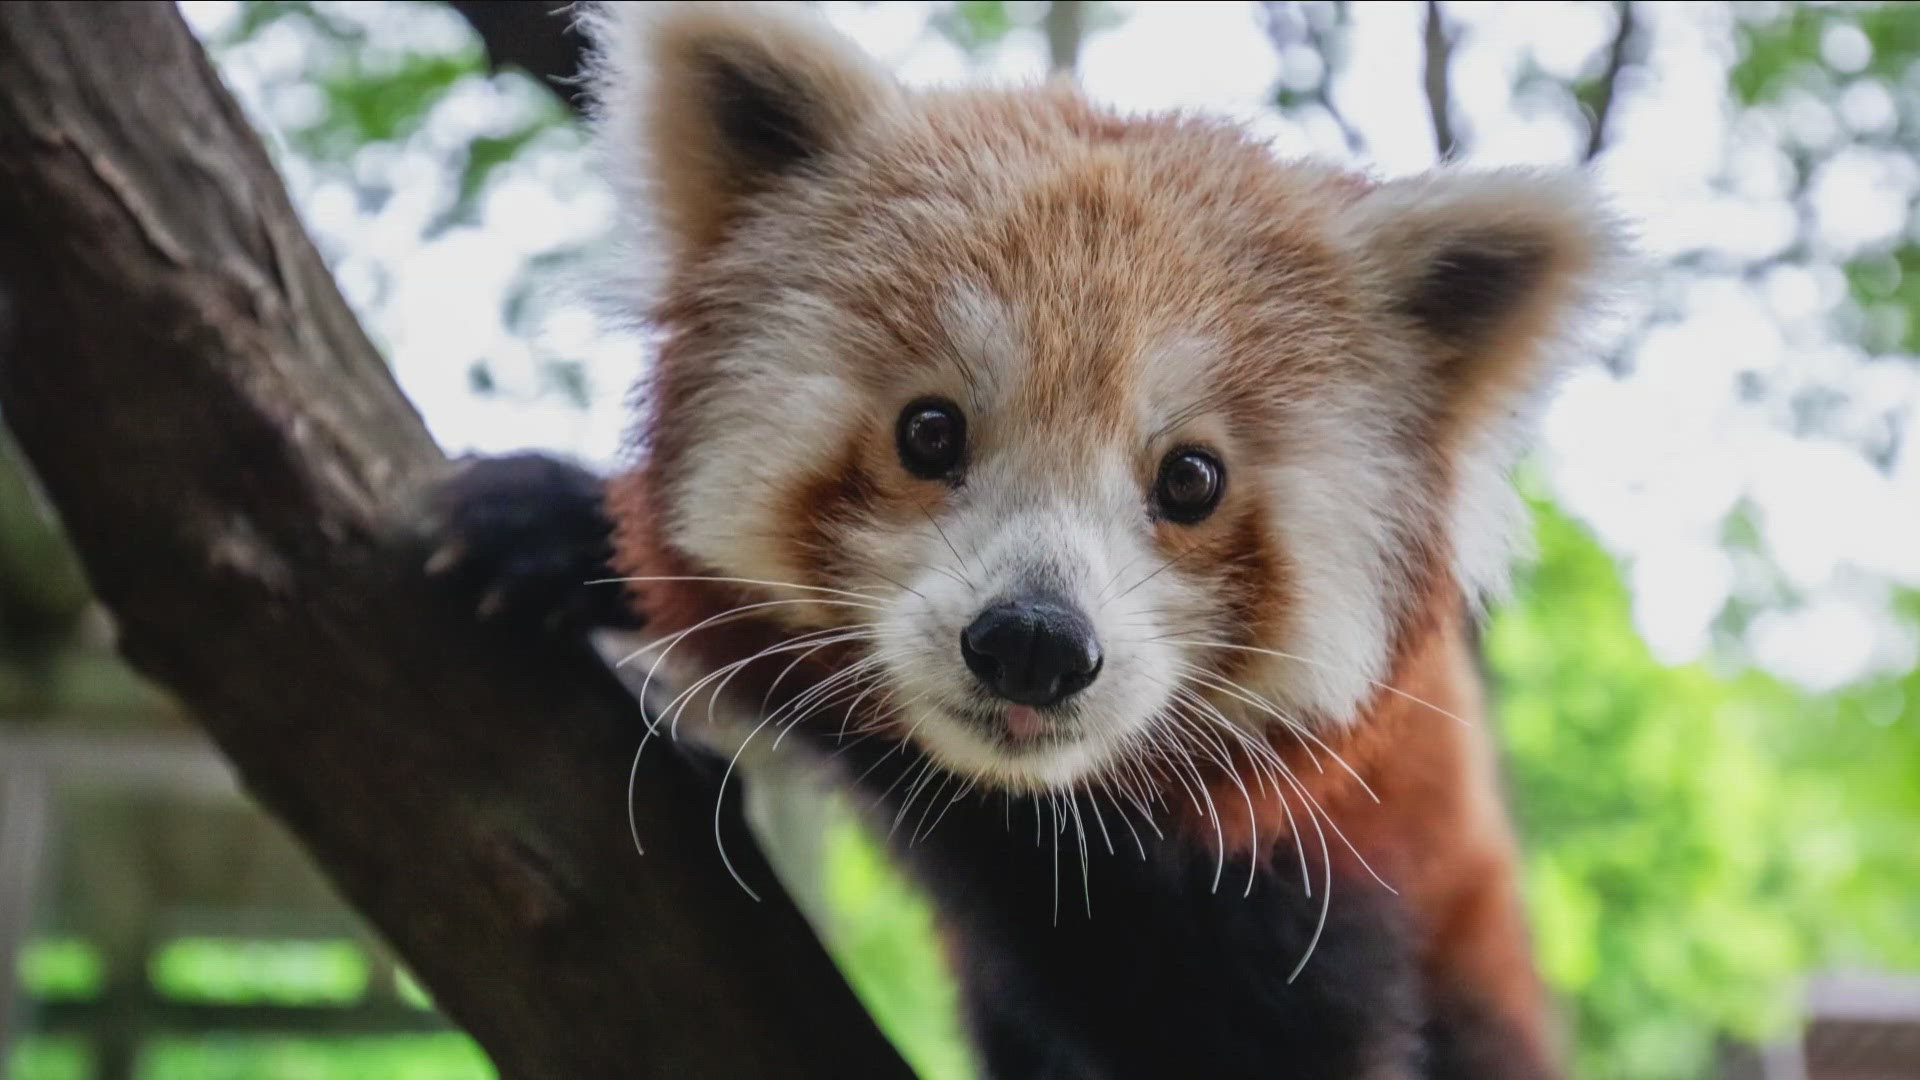 She's 11 years old and was brought here to mate with the zoo's other red panda Mogwai